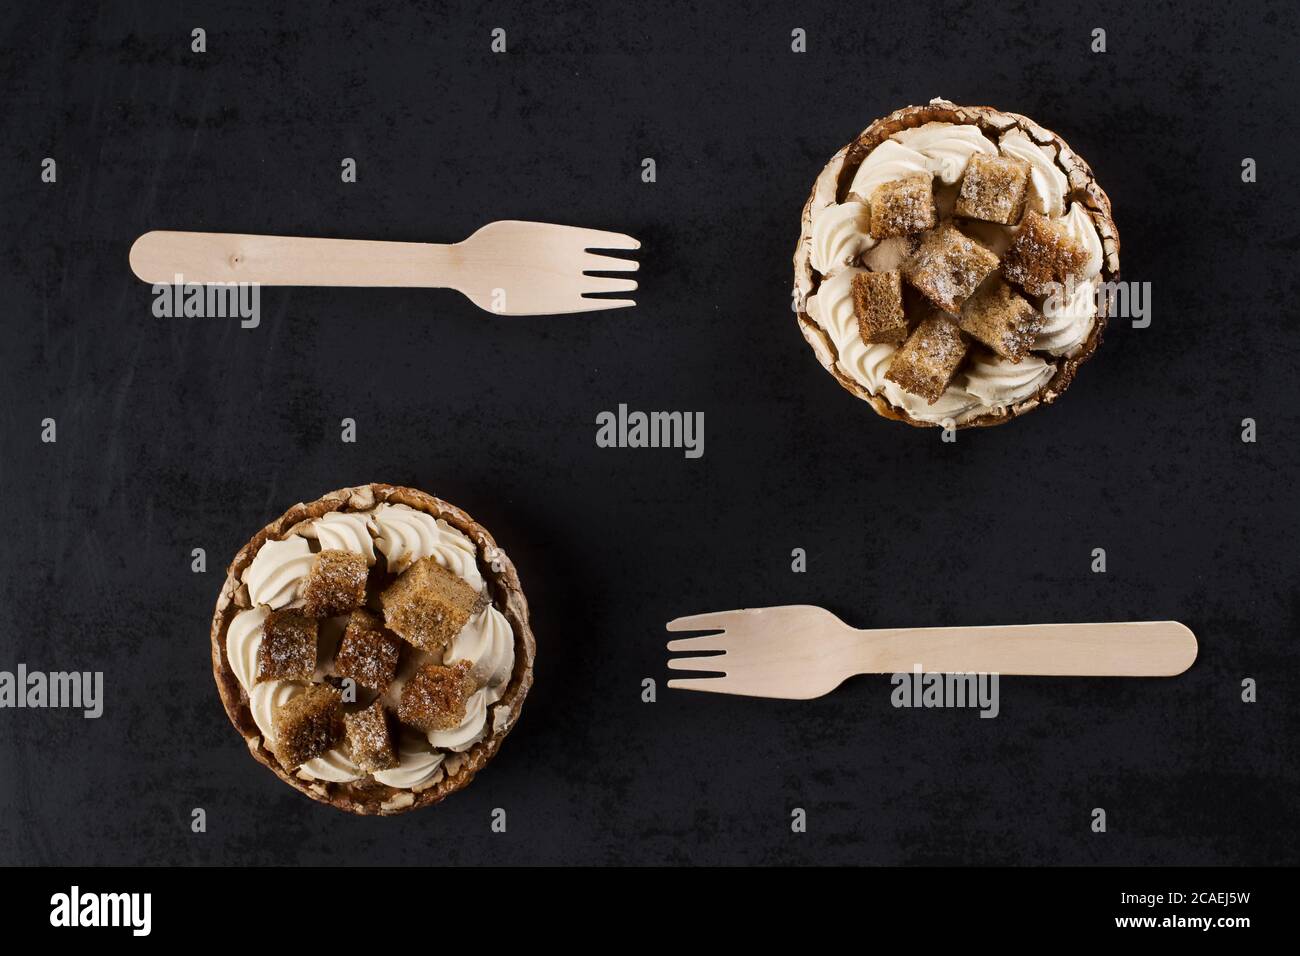 Two banofee high banana pie with wooden disposable fork against dark background Stock Photo